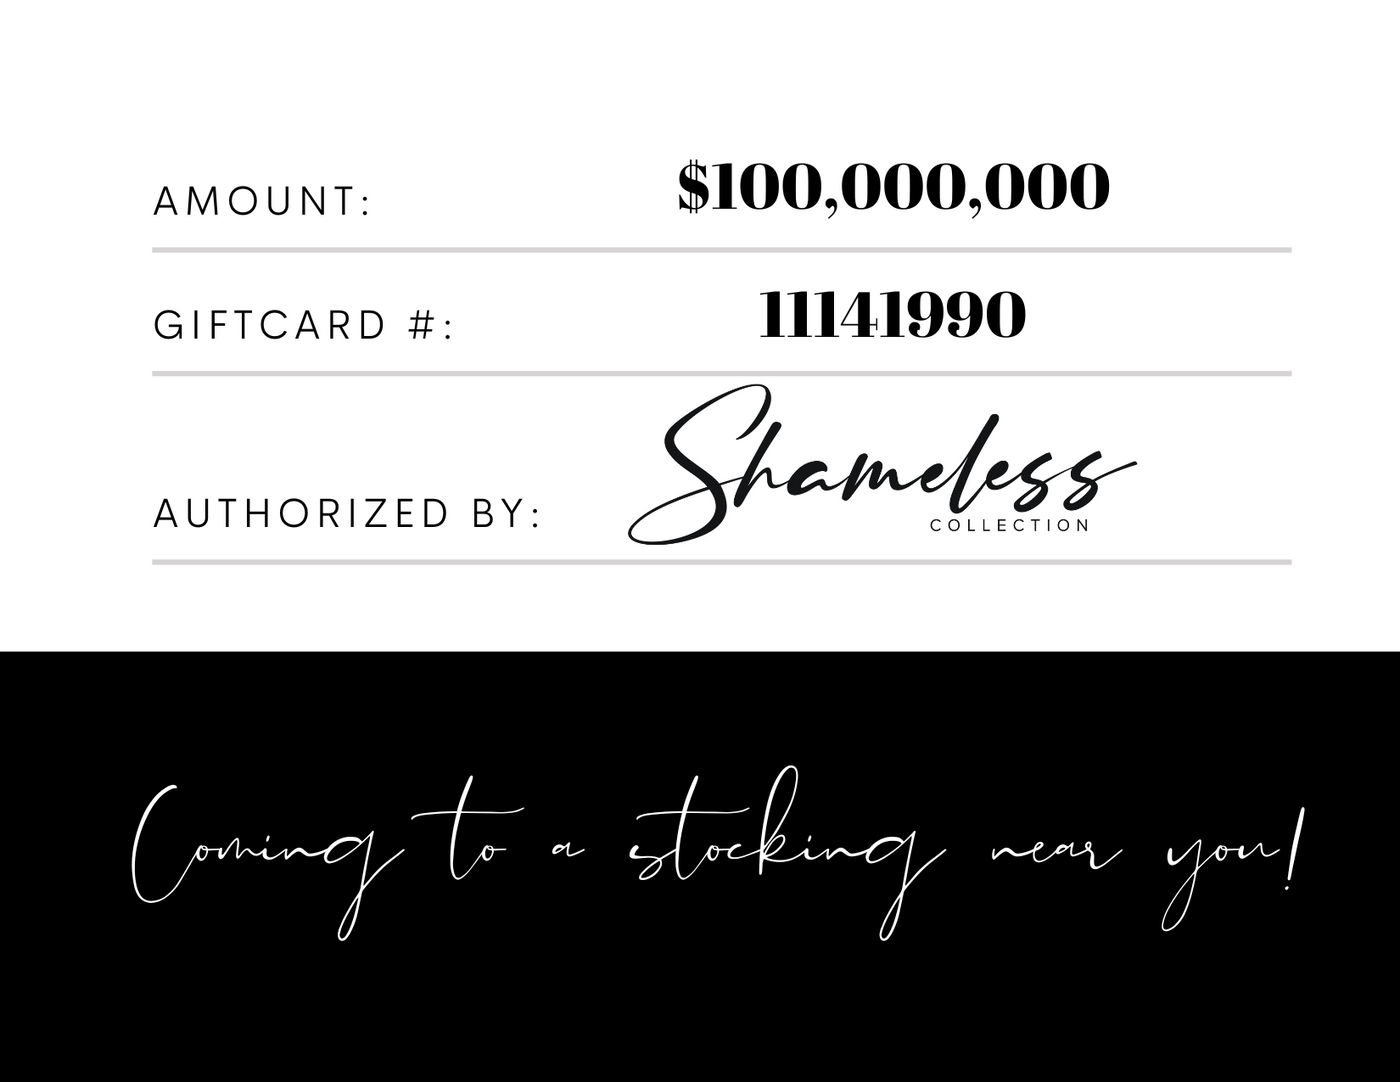 Shameless Collection Gift Certificate